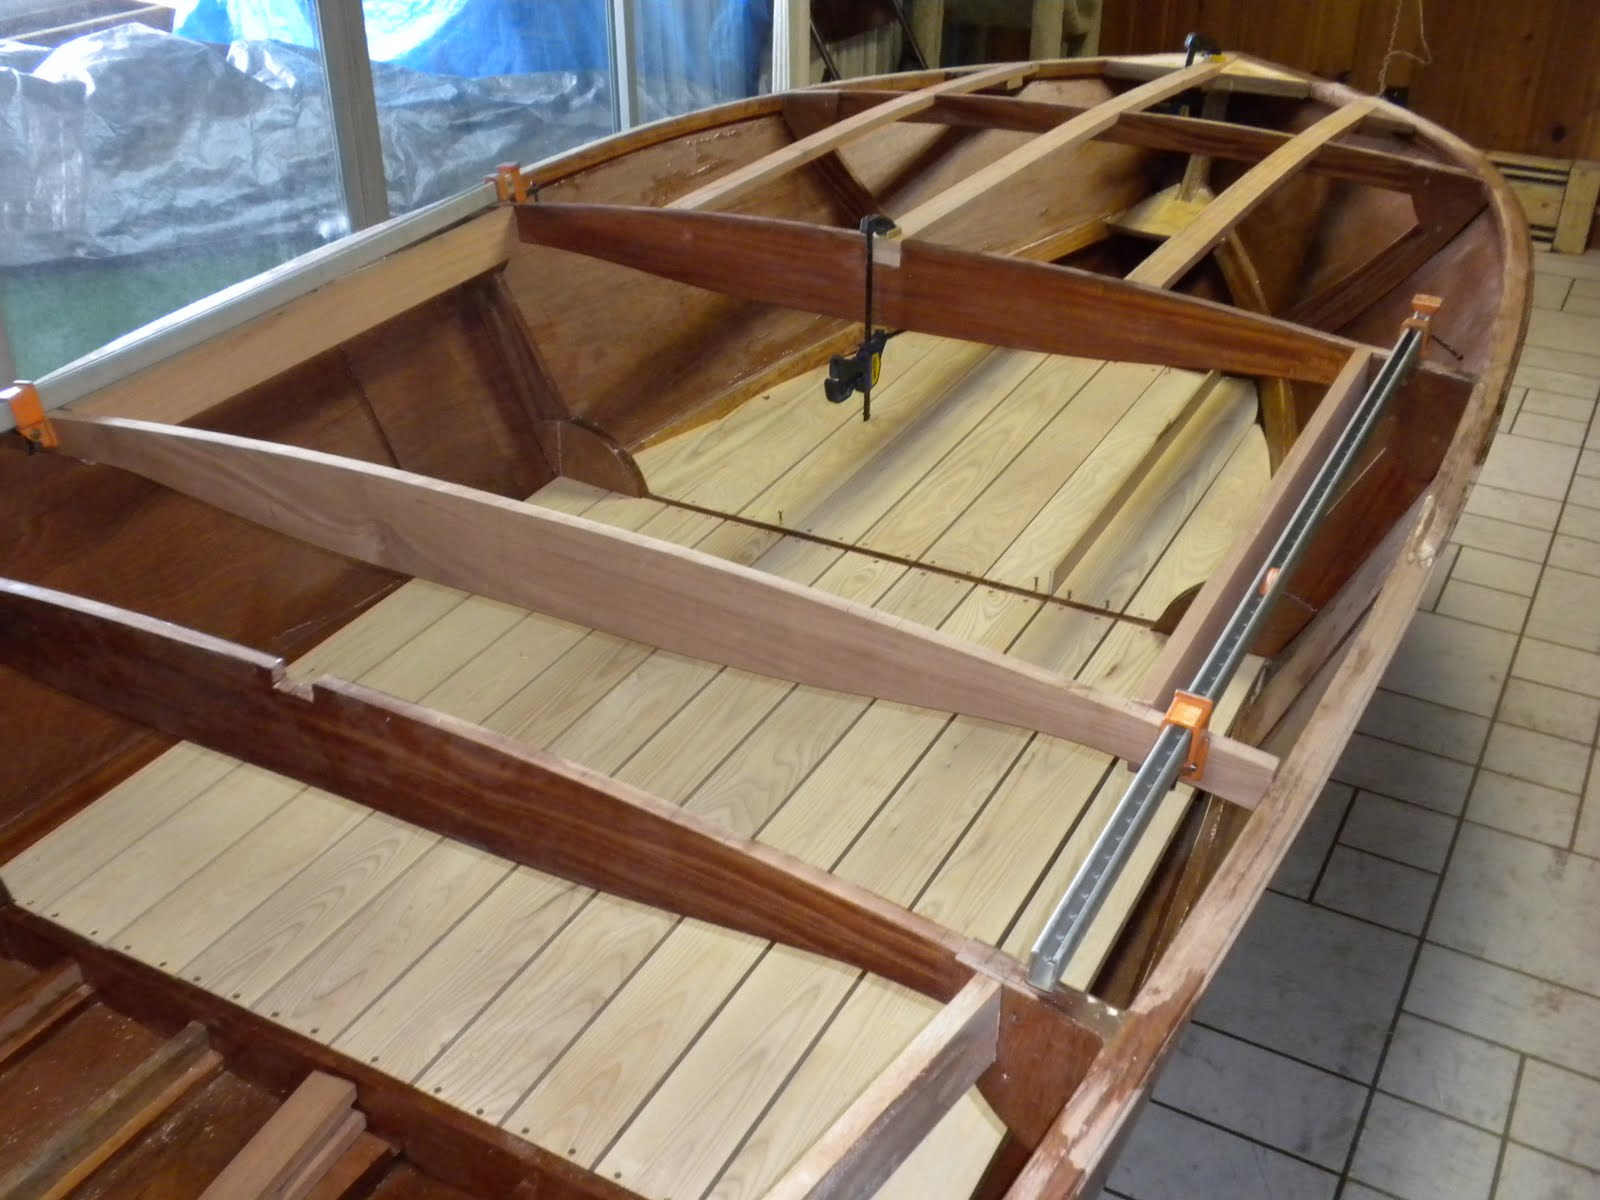 Ted's Wood Boat: Floor Layout